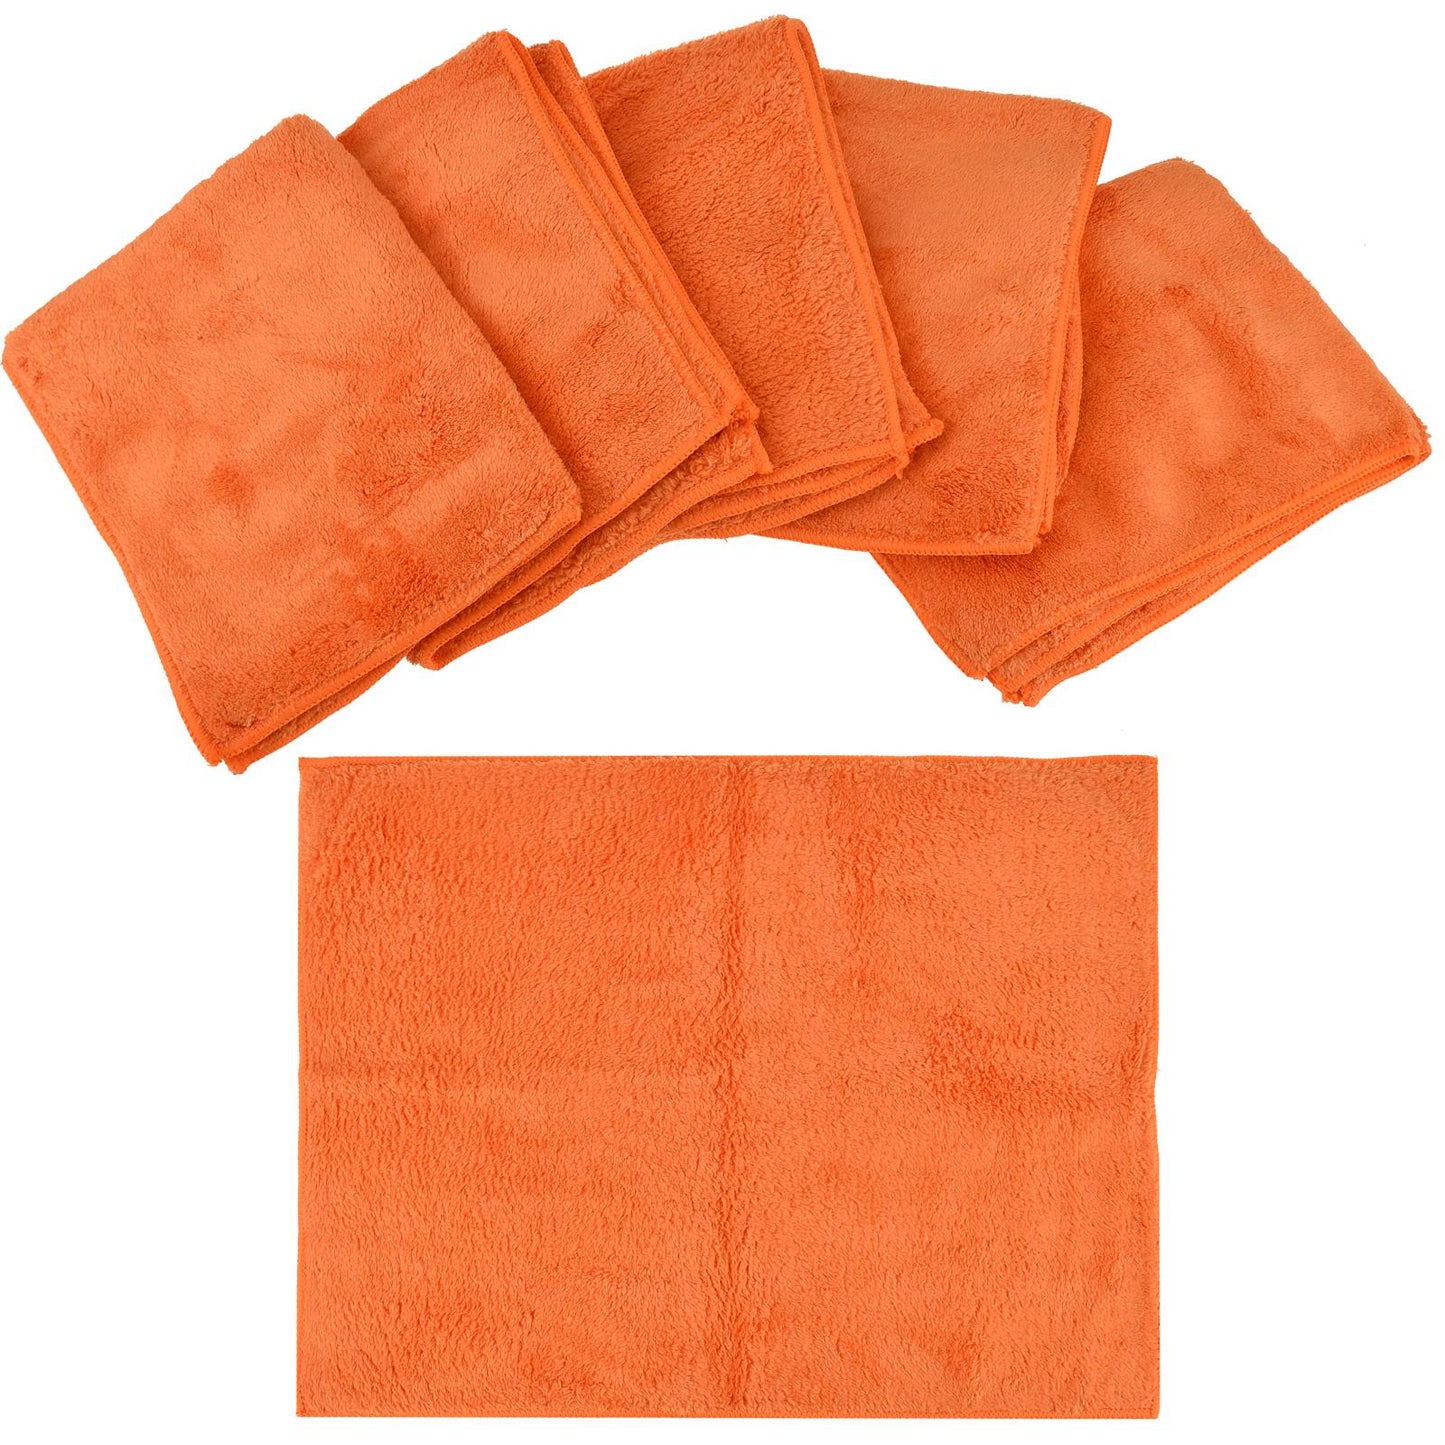 Pack Of 5 Soft Microfiber Cleaning Towels For Vehicles And Boats